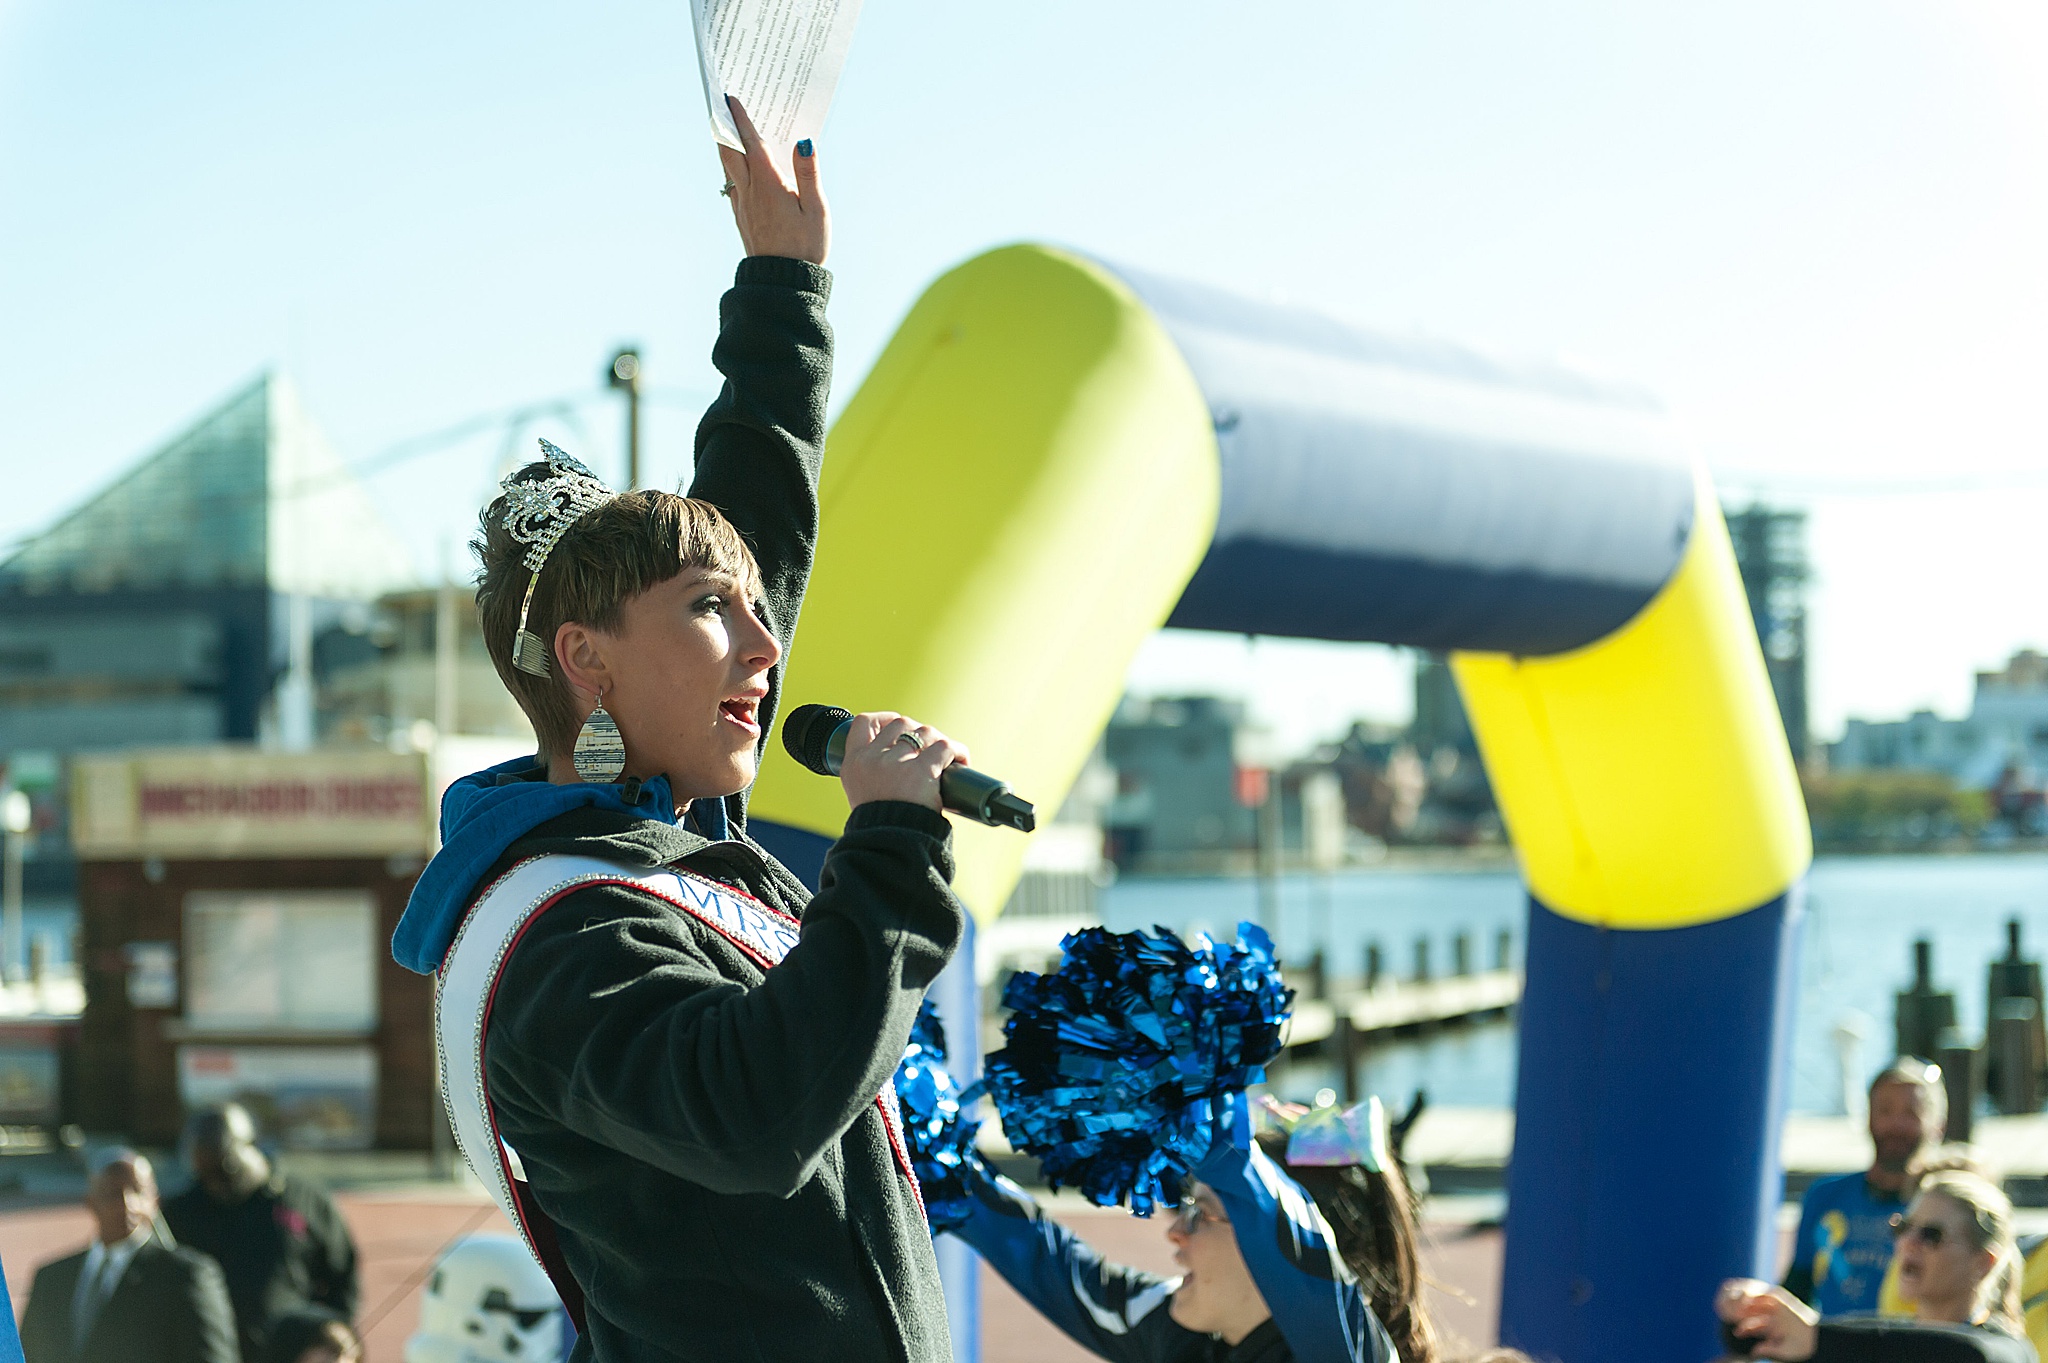 Wendy Zook Photography | Mrs Maryland at Baltimore Buddy Walk, Baltimore MD photographer, Down Syndrome Awareness, NDSS, Buddy Walk, Down Syndrome